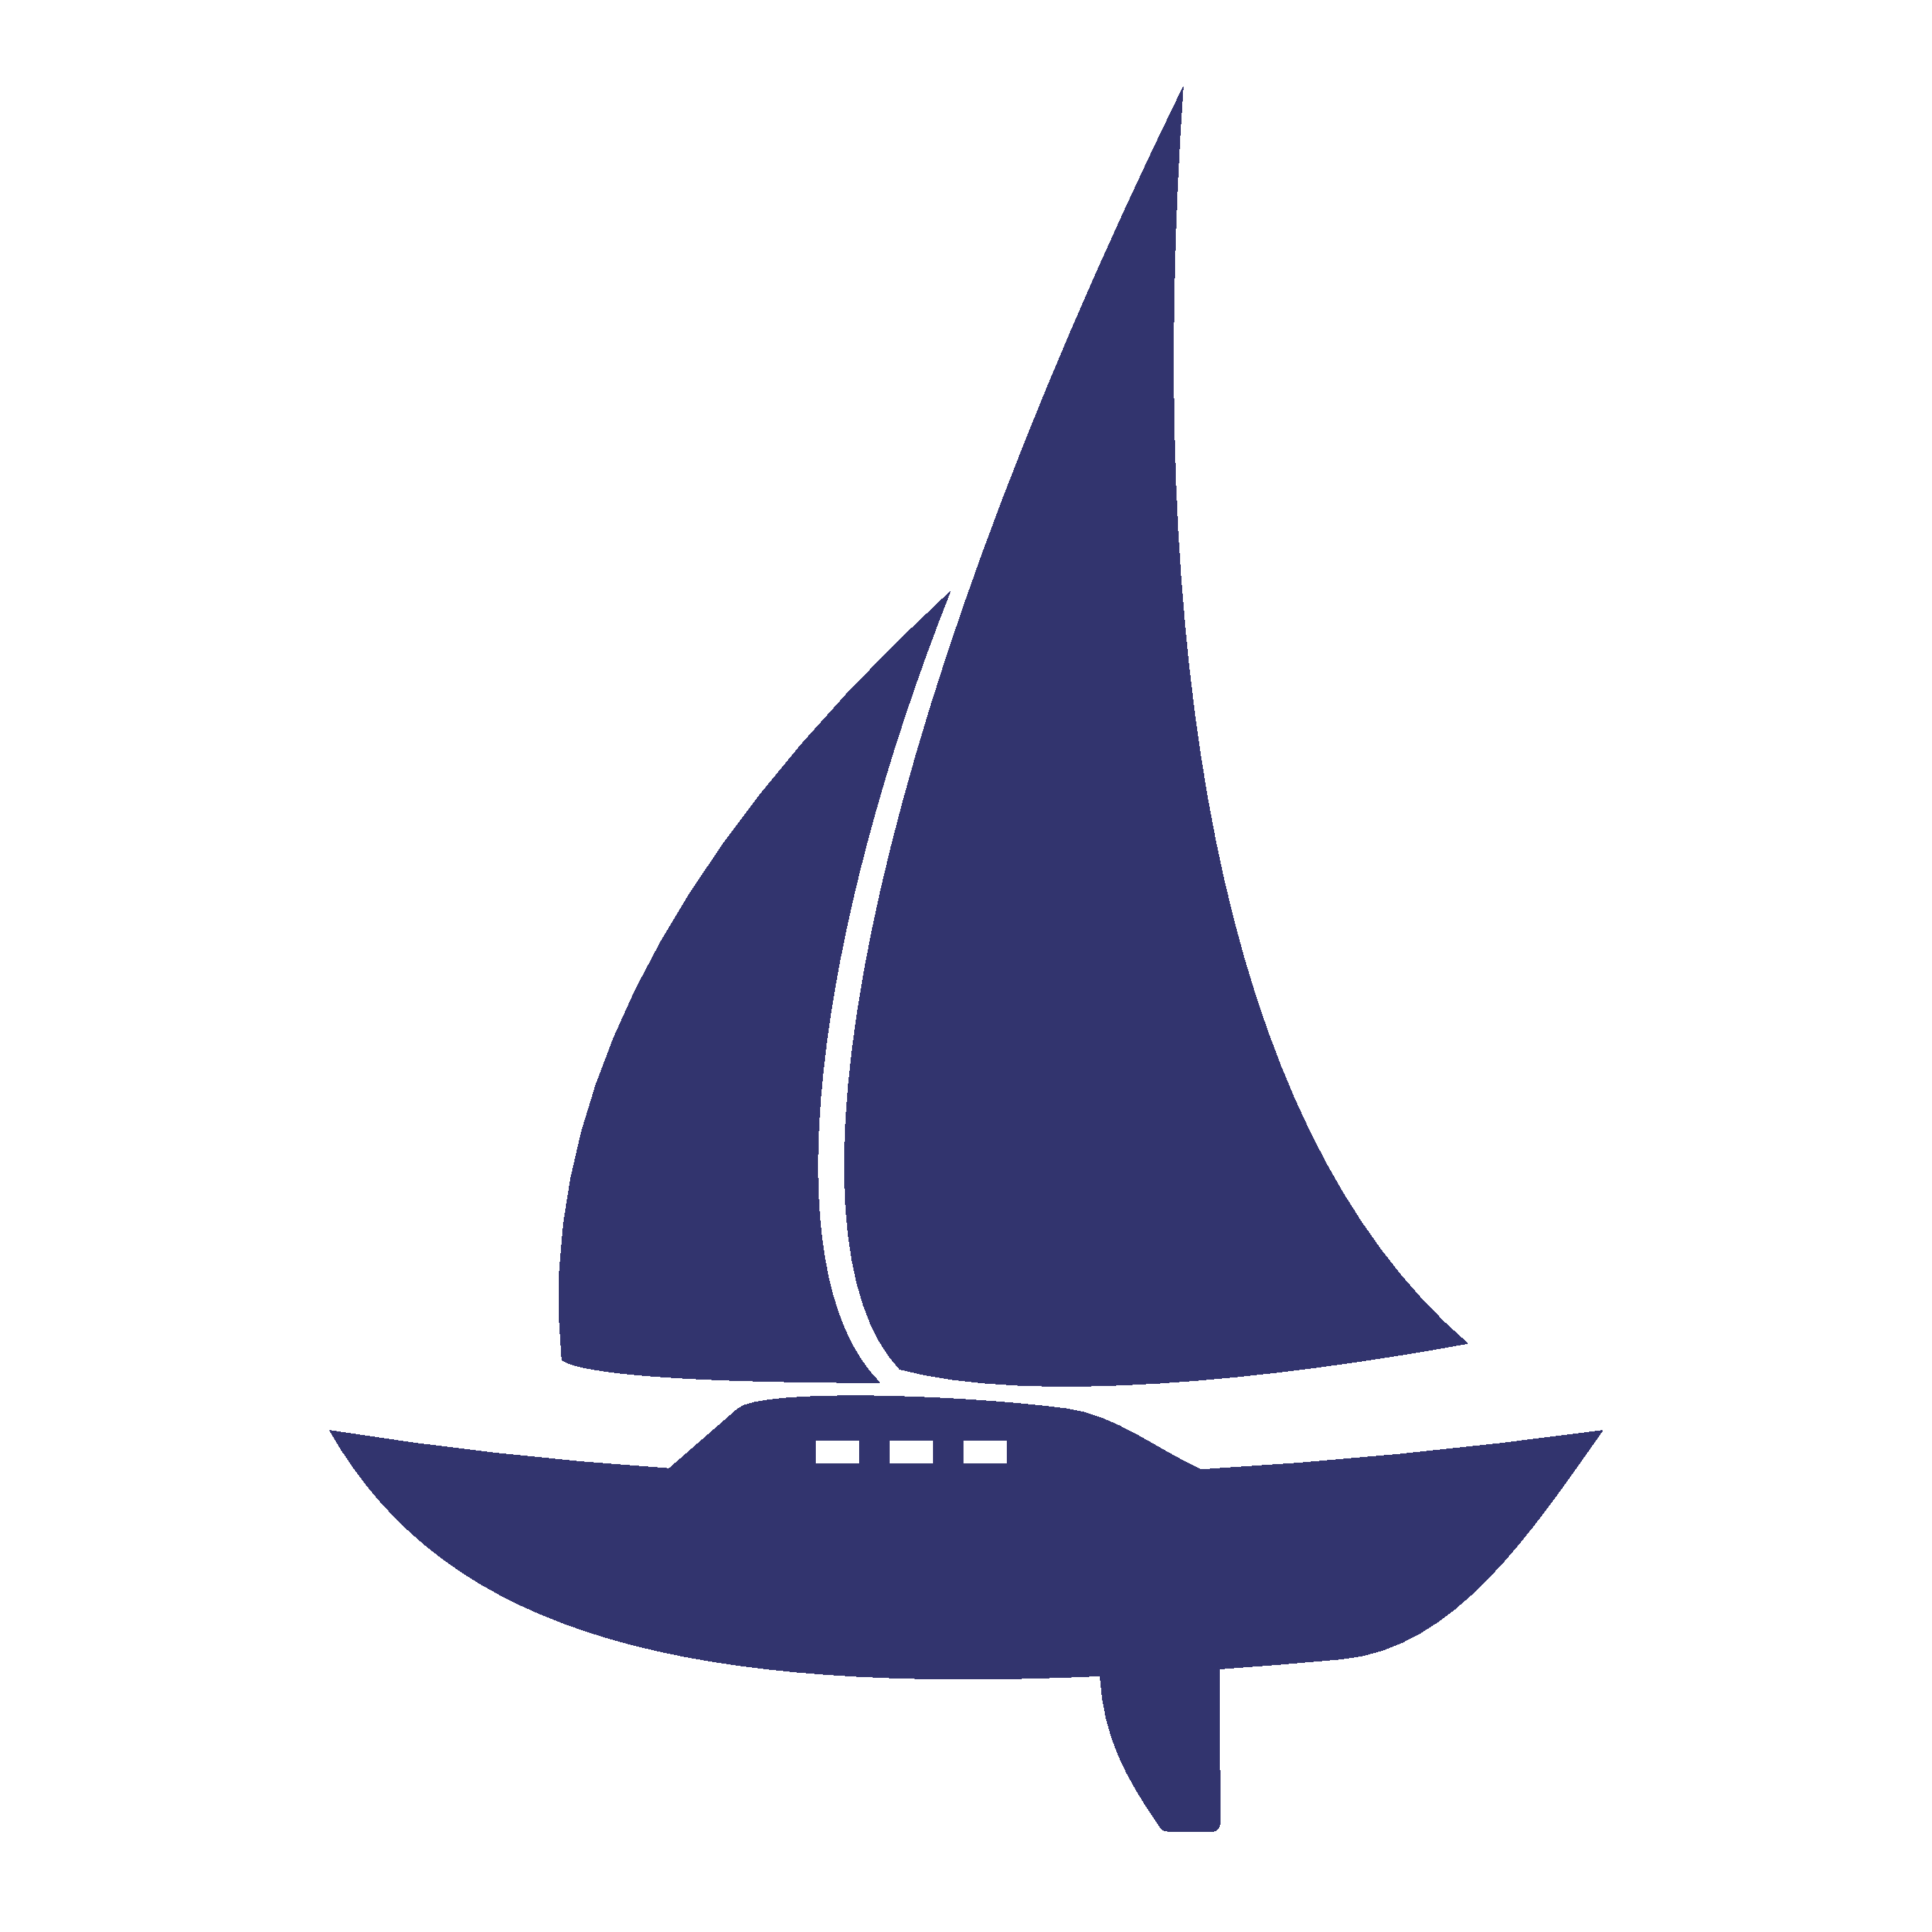 Visicover Sailing Yacht Insurance Online Yacht Insurance Sail Boat Insurance